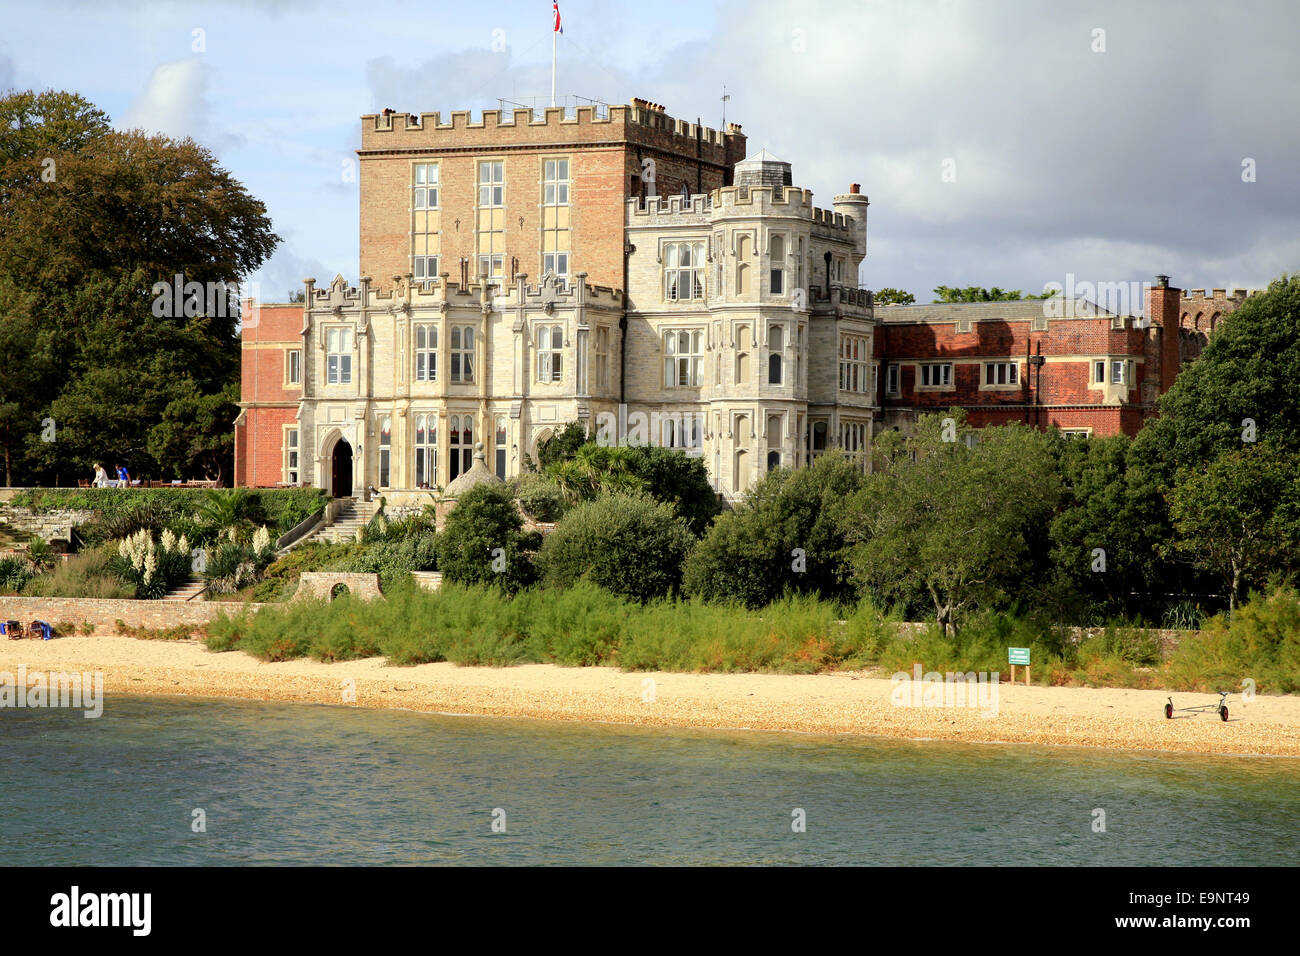 Brownsea castle also known as Branksea castle on the island of Brownsea in Poole harbour, Dorset, England, UK. Stock Photo